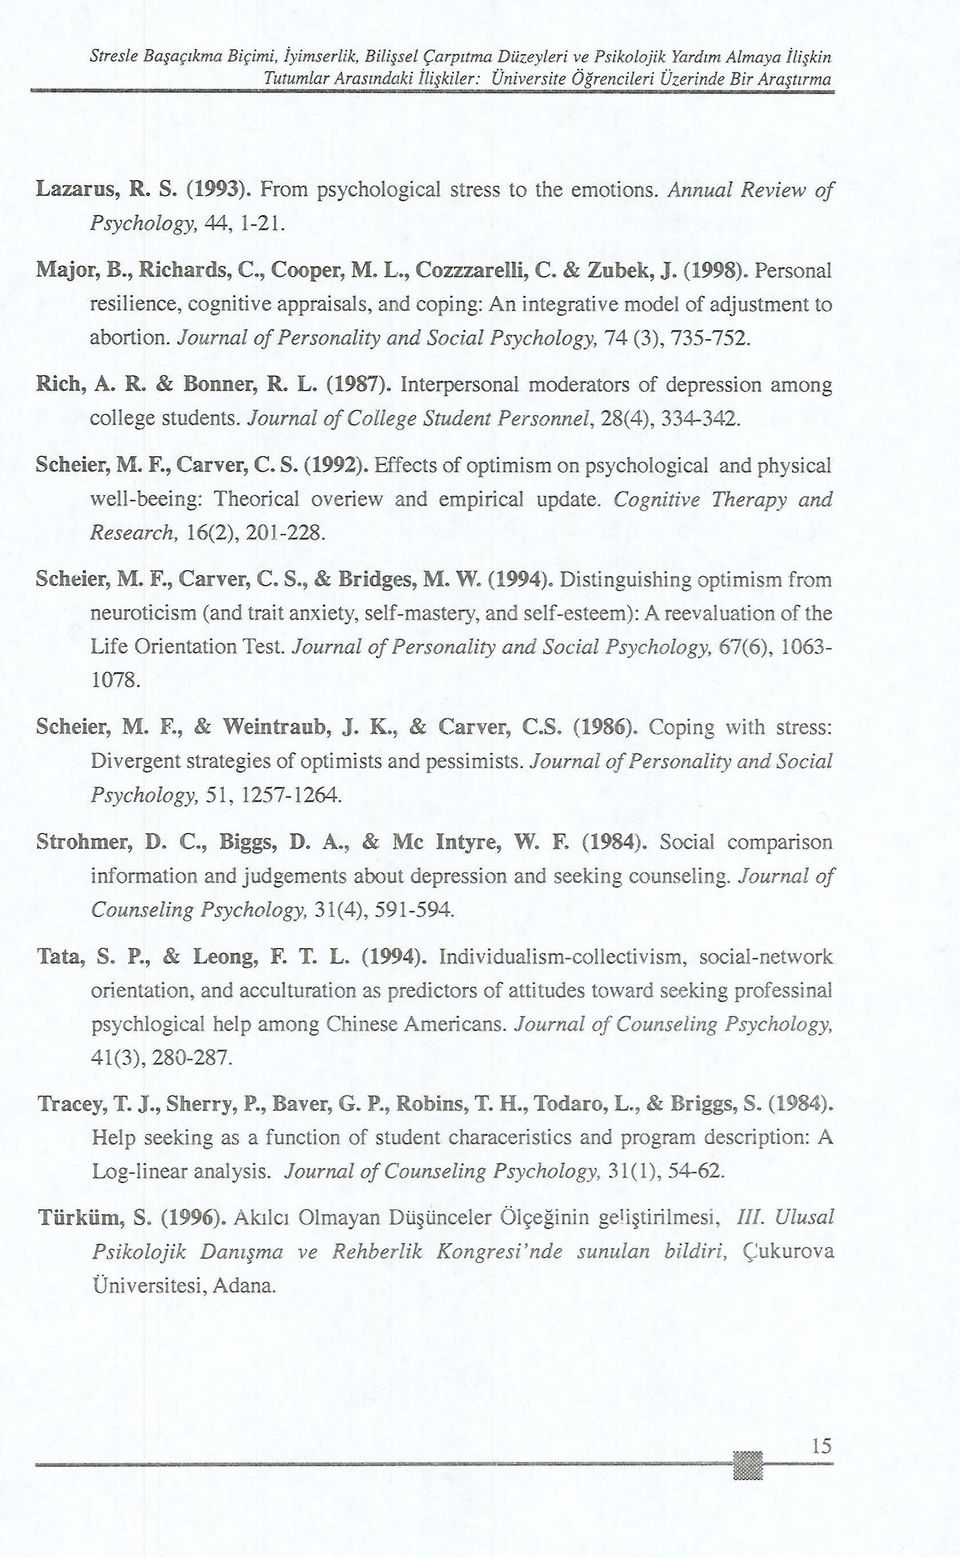 Personal resilience, cognitive appraisals, and coping: An integrative model of adjustment to abortion. Journal of PersonaUty and Social Psychology, 74 (3), 735-752. Rich, A. R. & Bonner, R. L. (1987).